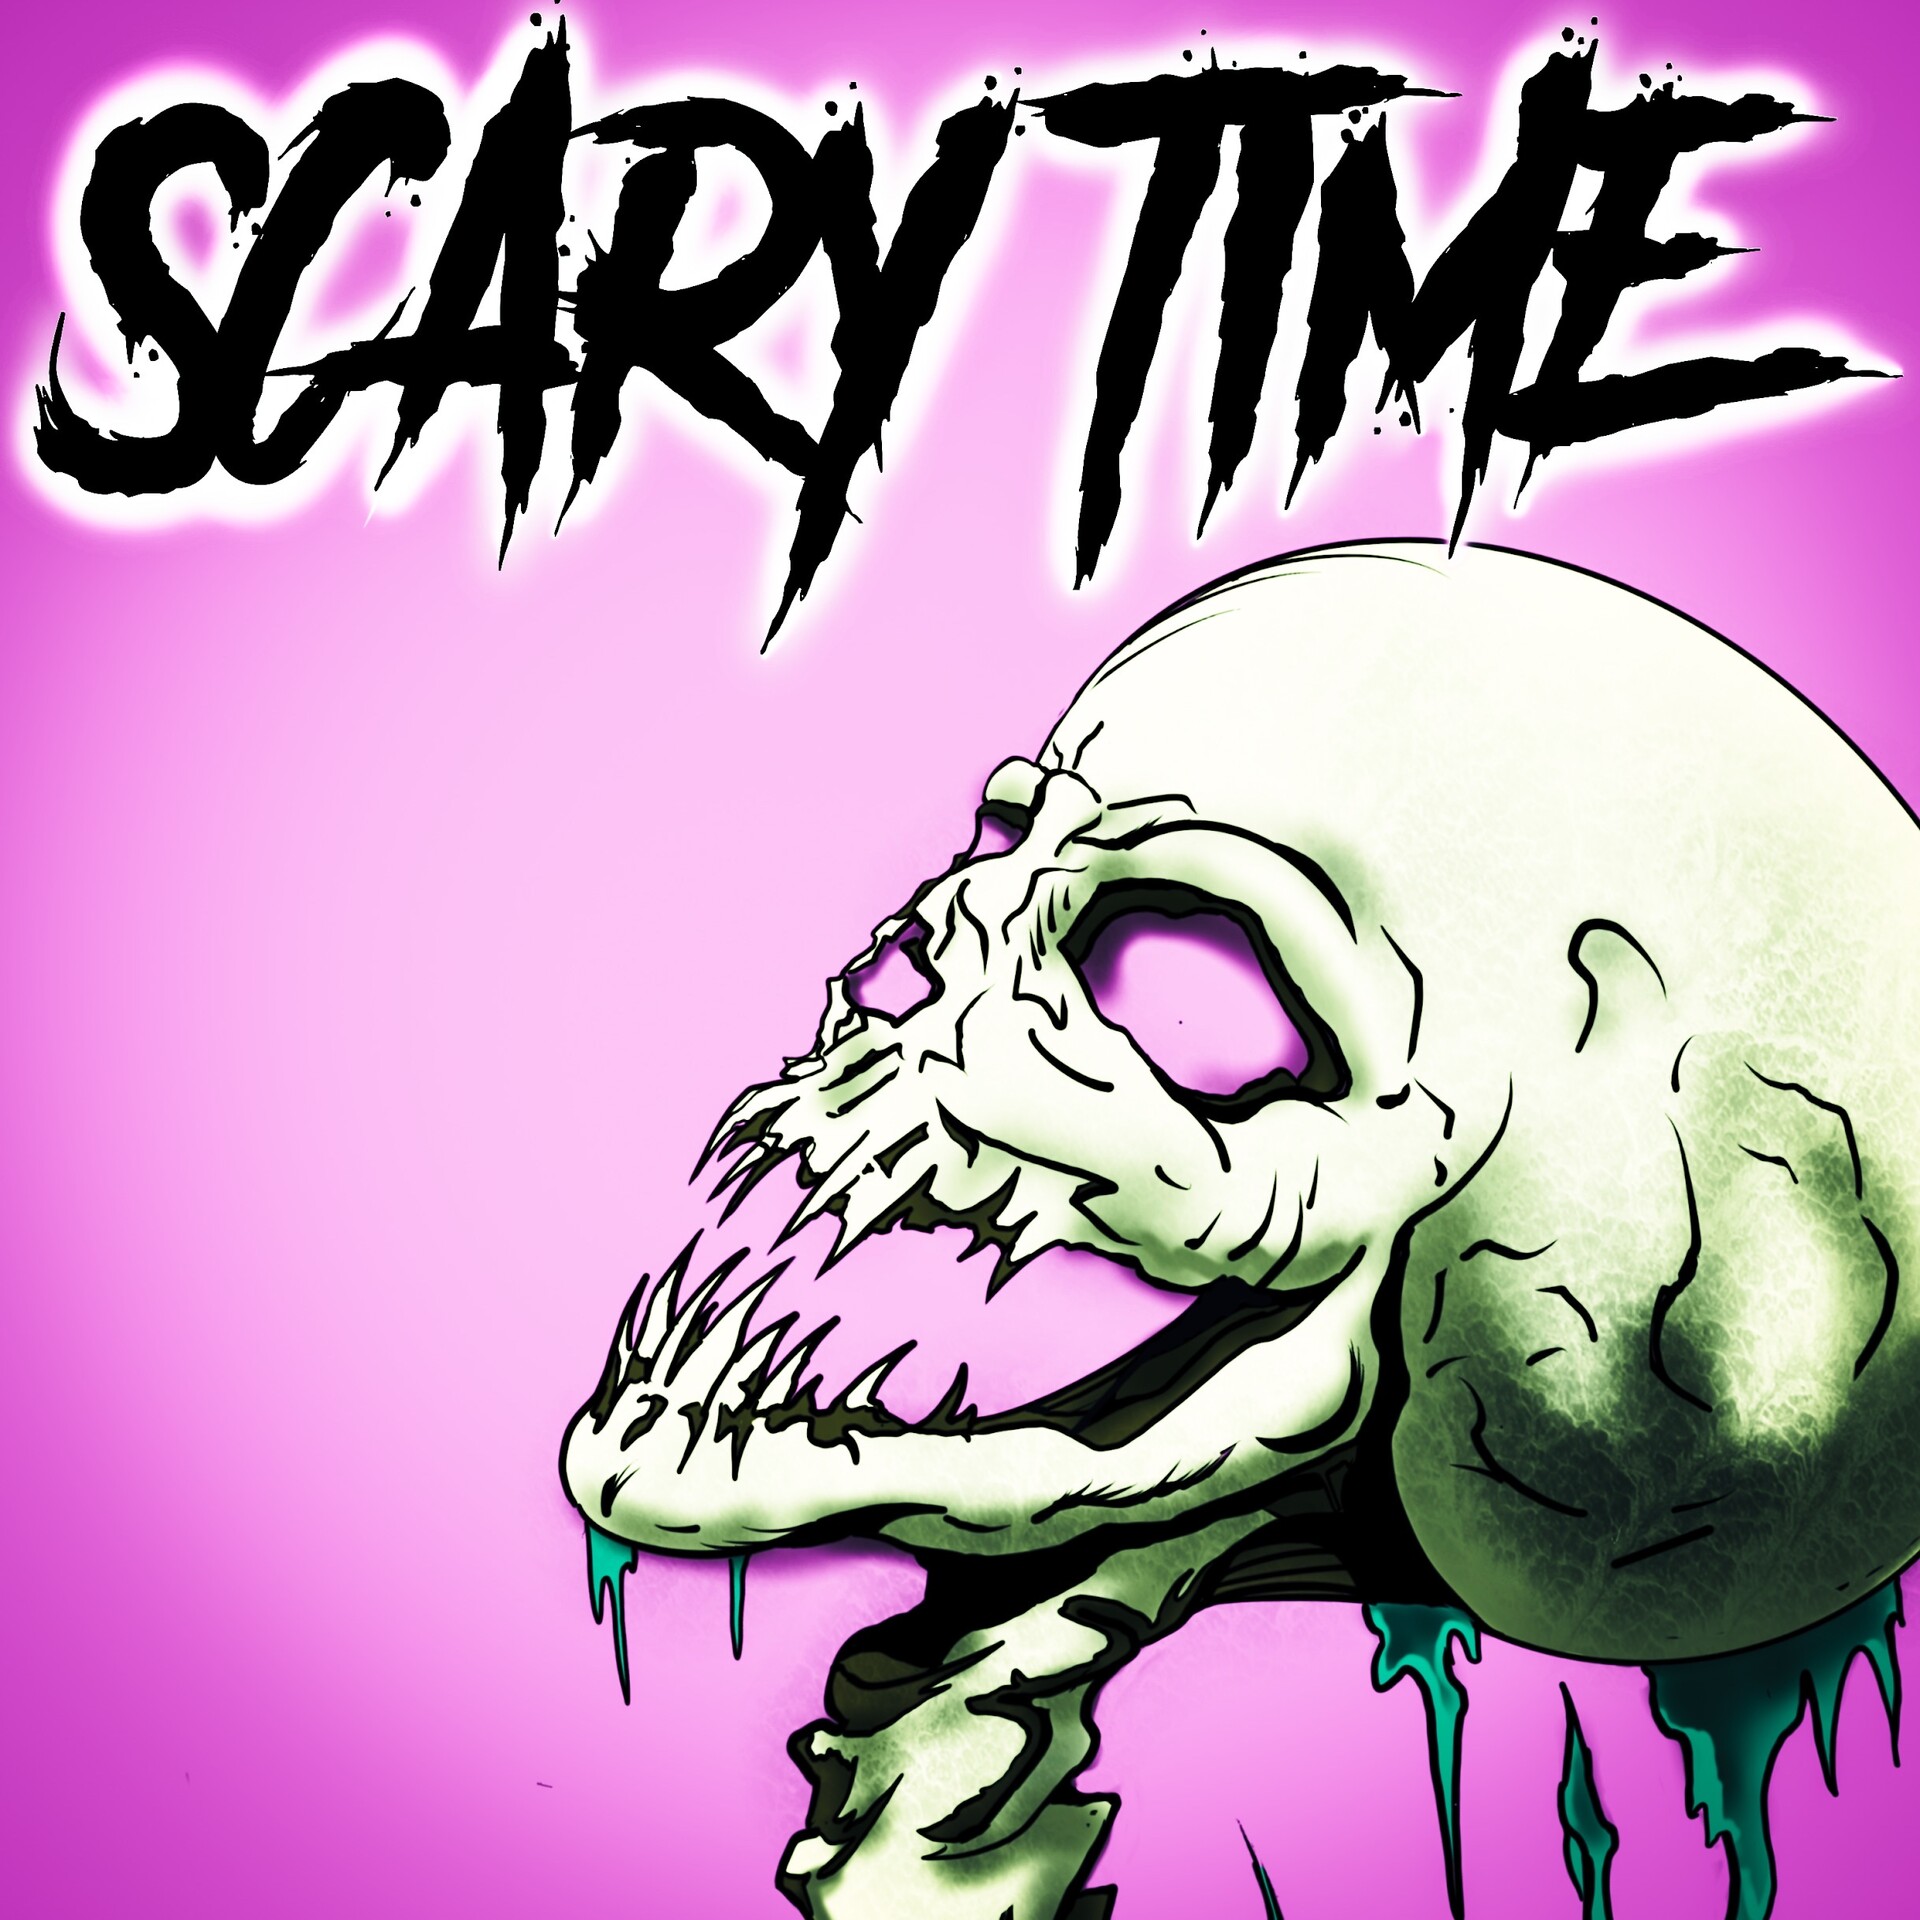 Time scare